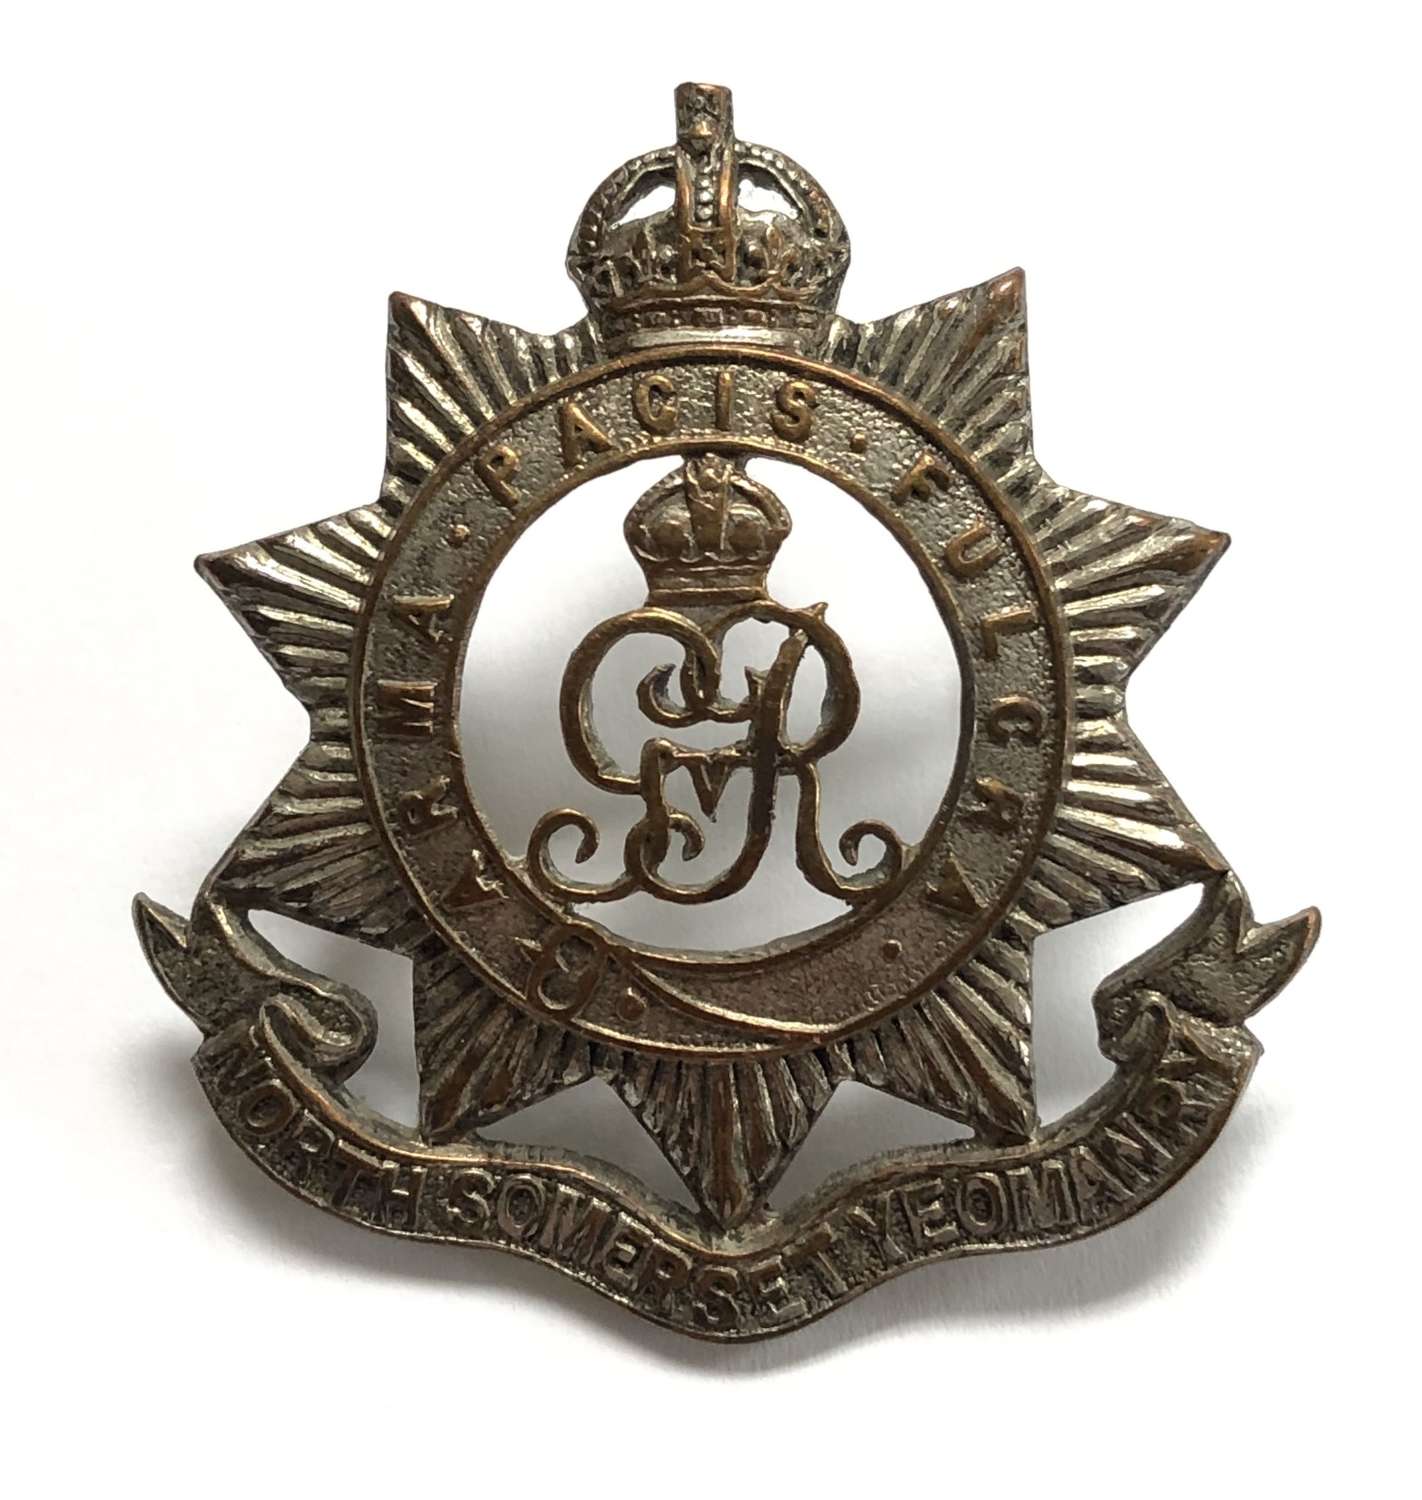 North Somerset Yeomanry Officer's cap badge